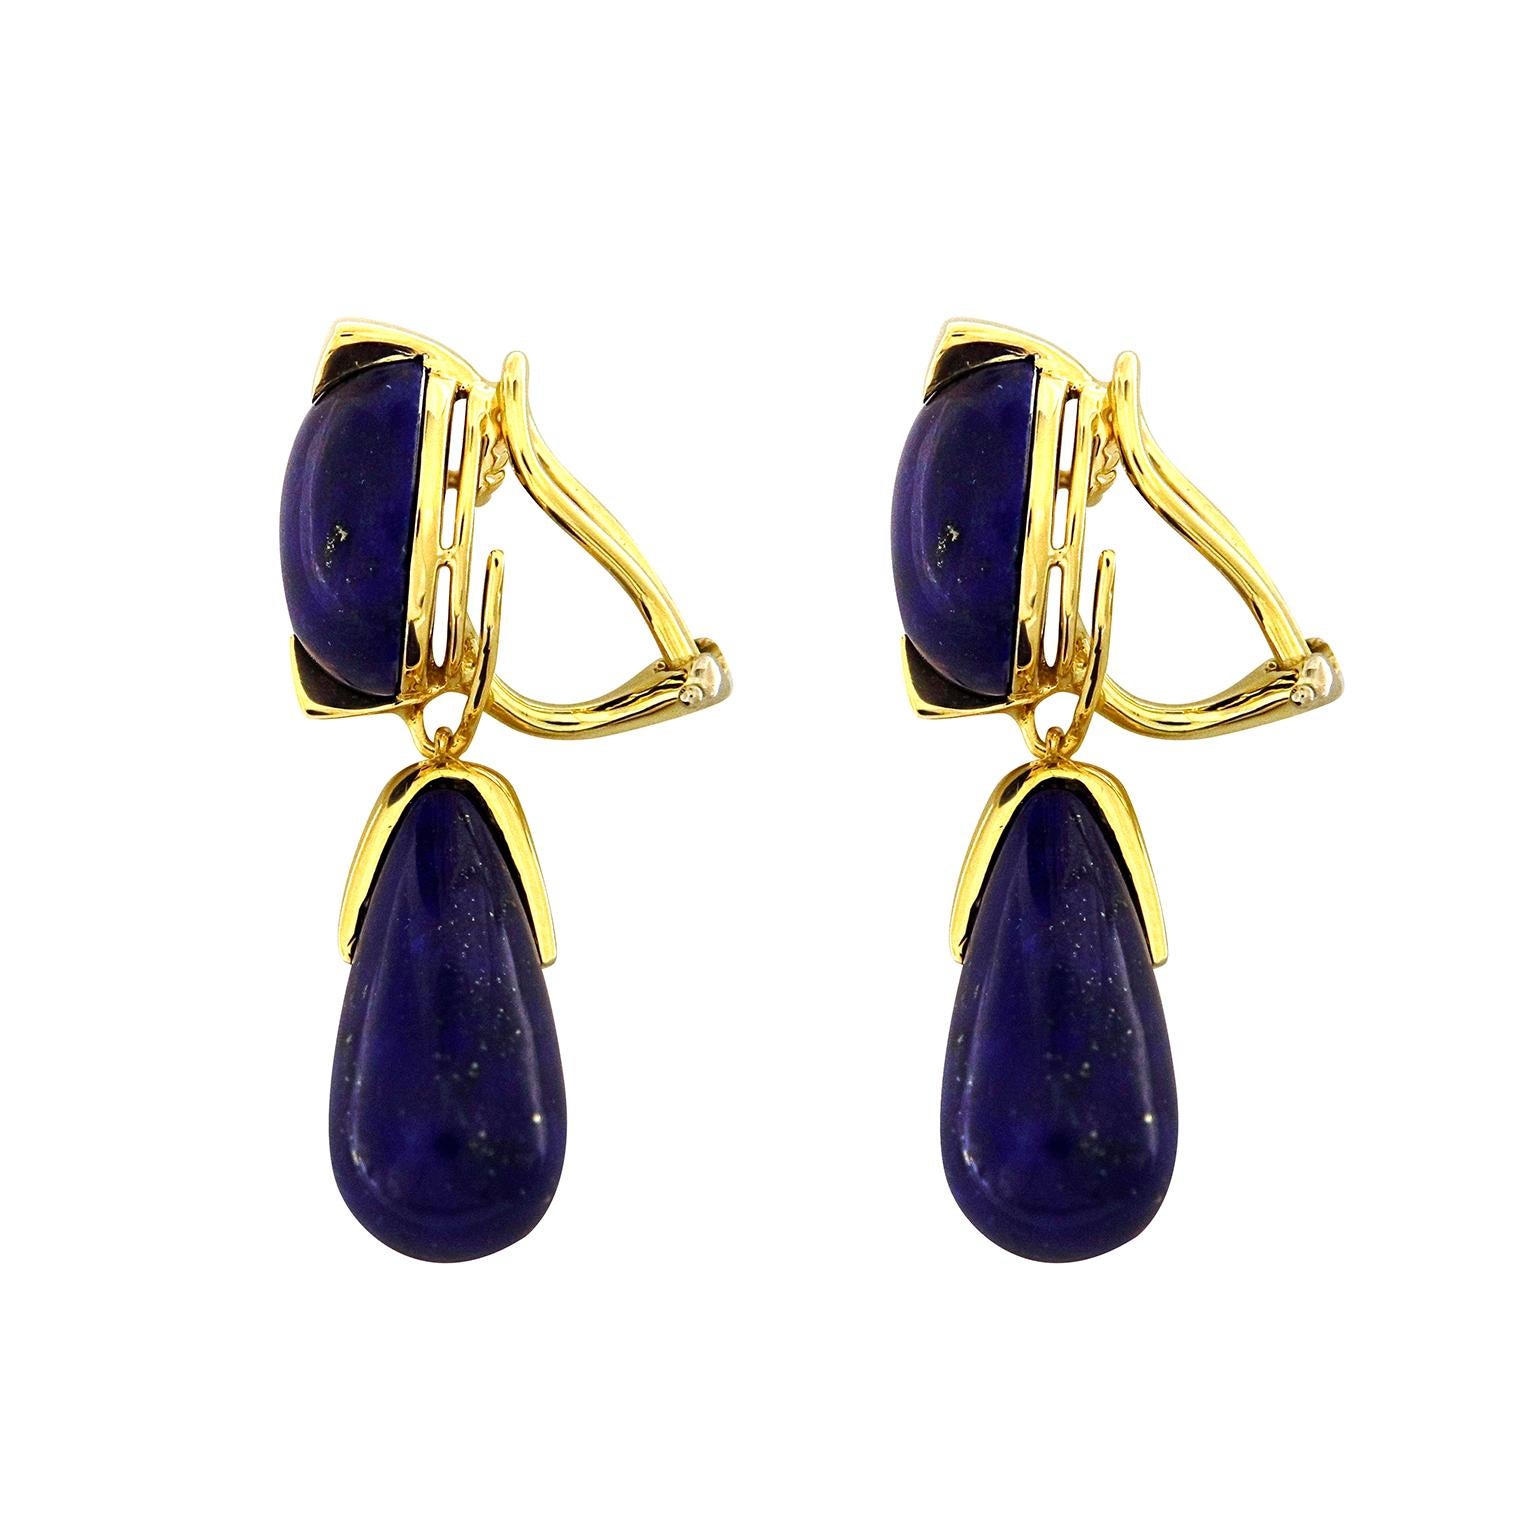 Bright gold accents these deep-toned drop earrings. Lapis lazuli is carved into round cabochons and pear drops, showcasing their dark azures. A closer look reveals bits of pyrite interspersed throughout the jewels. Prongs and caps of 18k yellow gold